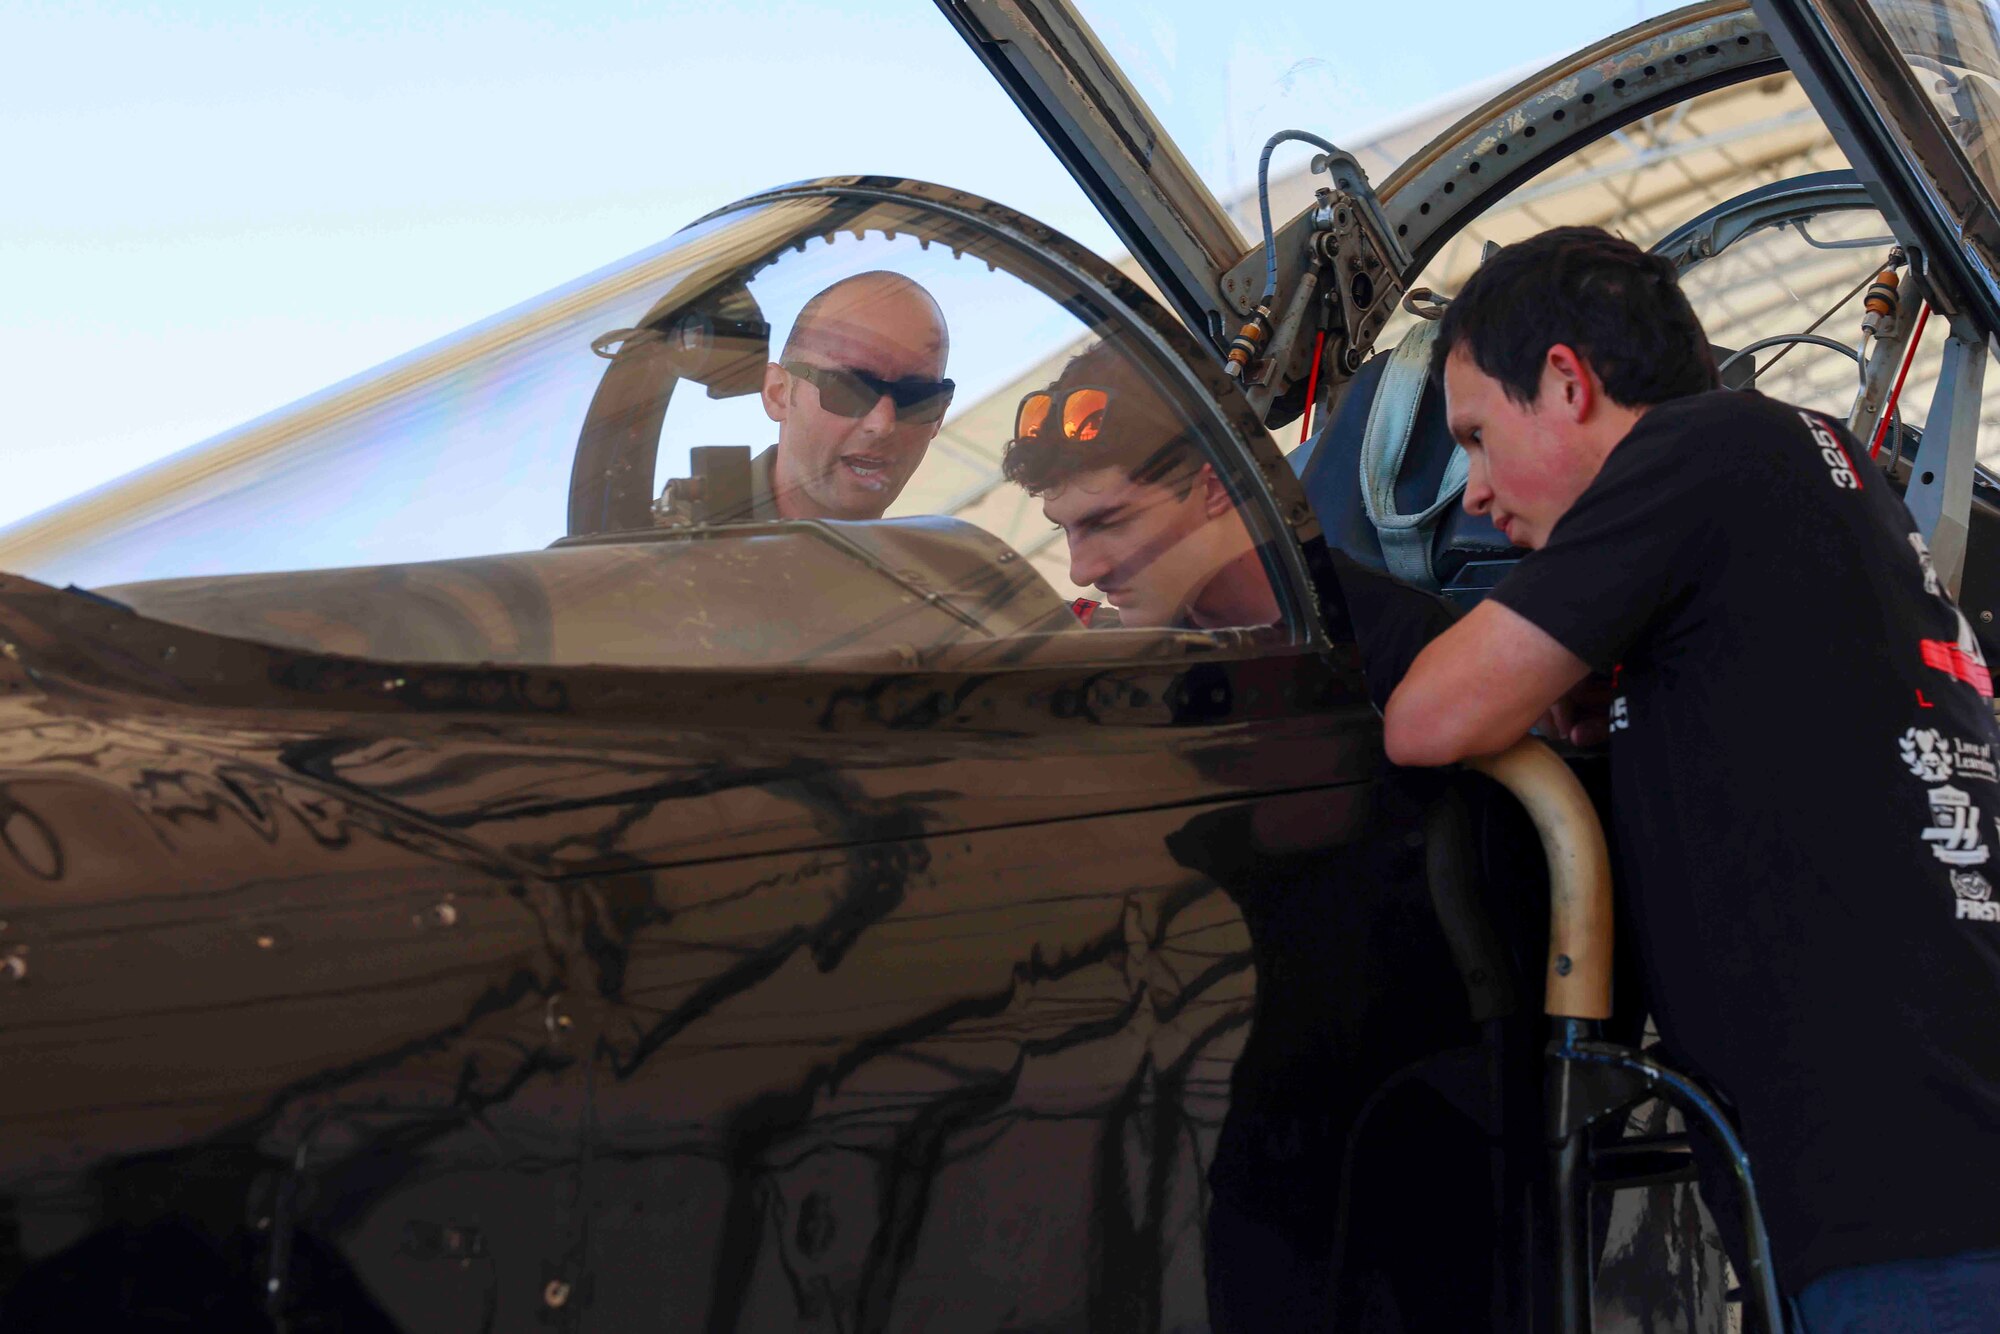 U.S. Air Force Lt. Col. Cole, 1st Reconnaissance Squadron pilot, shows Charles Hinky and Evan White, students with For Inspiration and Recognition of Science and Technology (FIRST), the various controls in the cockpit of a T-38 Talon during a base tour Aug. 3, 2023, at Beale Air Force Base, California.